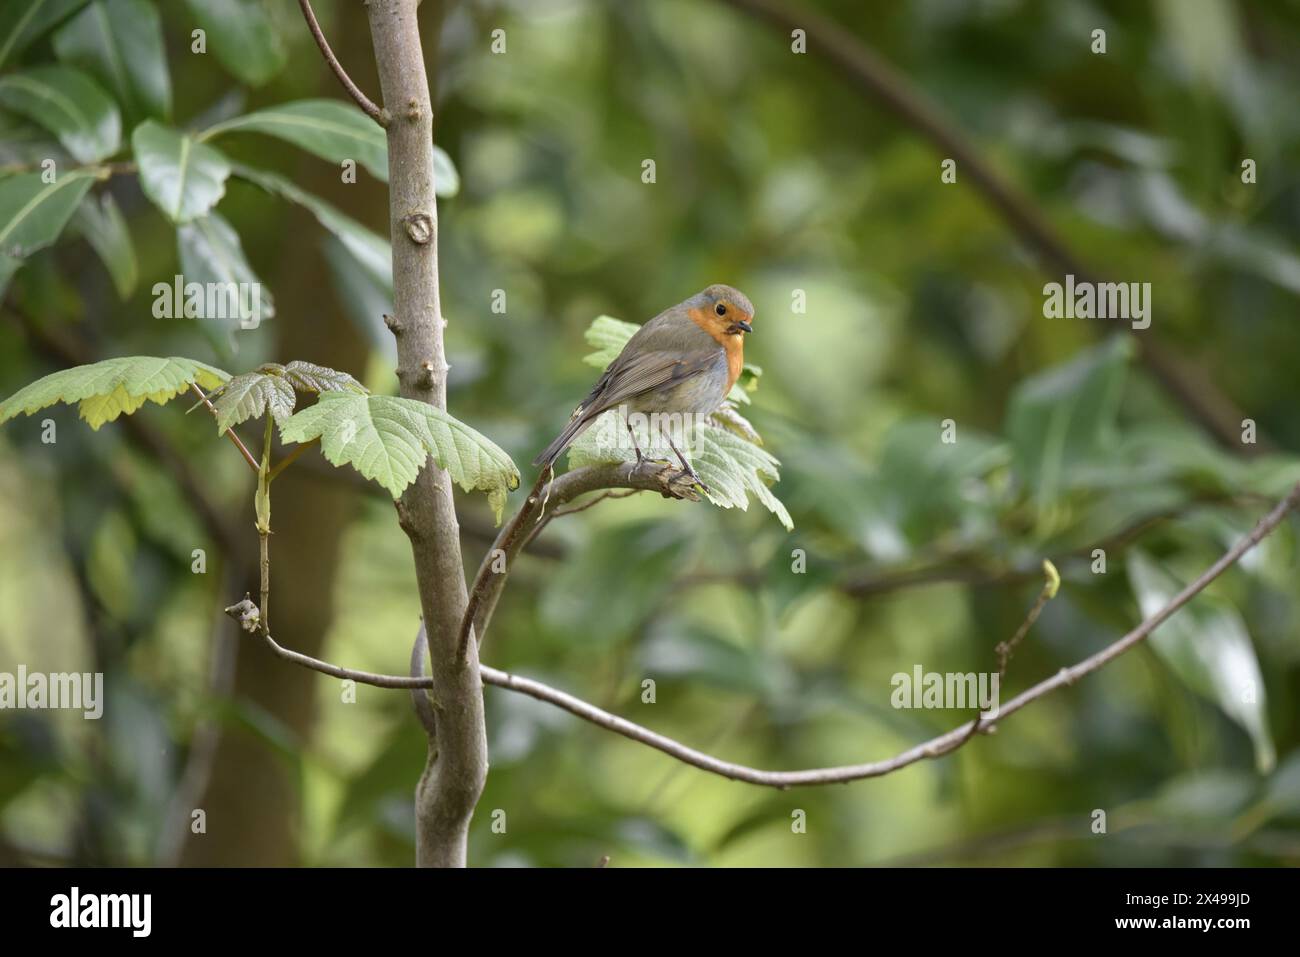 Centre Foreground Image of a European Robin (Erithacus rubecula) Perched in Right-Profile on the End of a Twig, against a Green Foliage Background Stock Photo